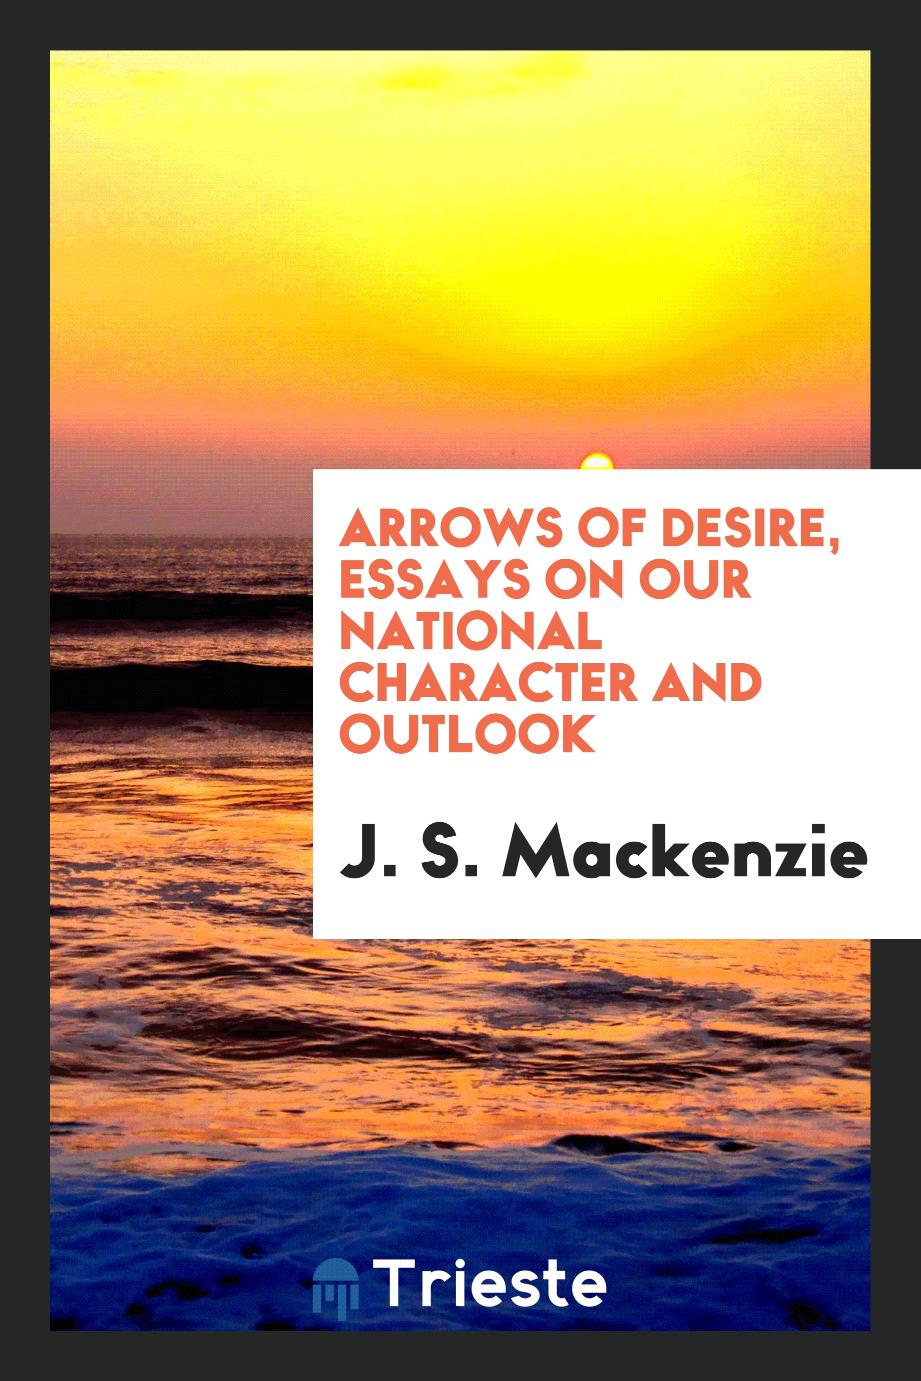 Arrows of desire, essays on our national character and outlook